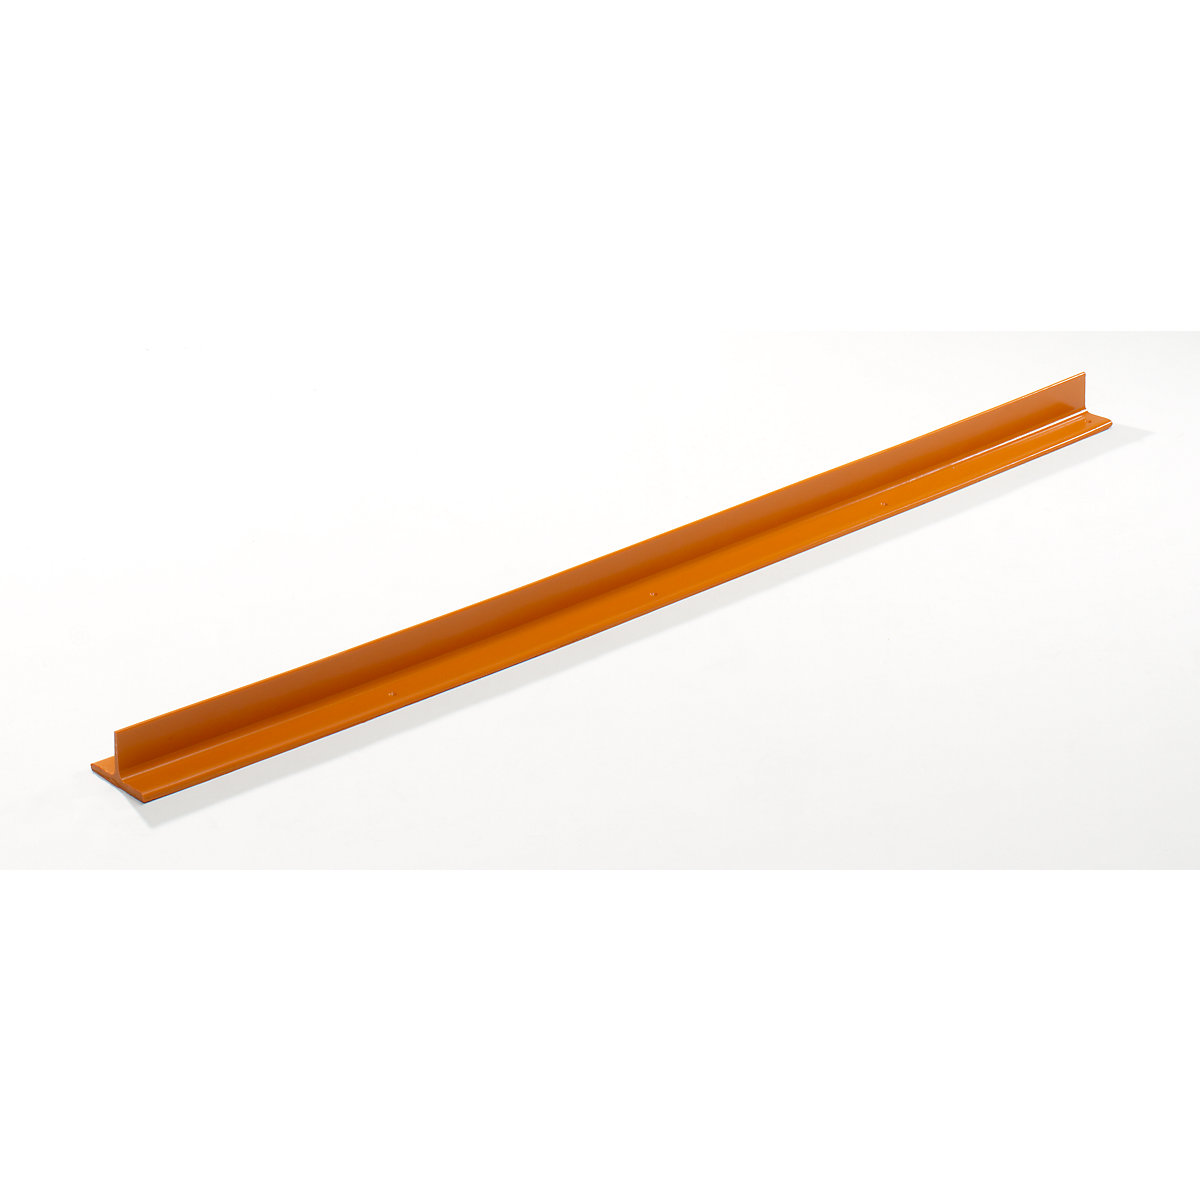 Barrier roll, permanent, for bolting in place or fastening with adhesive, LxWxH 1500 x 100 x 60 mm-3